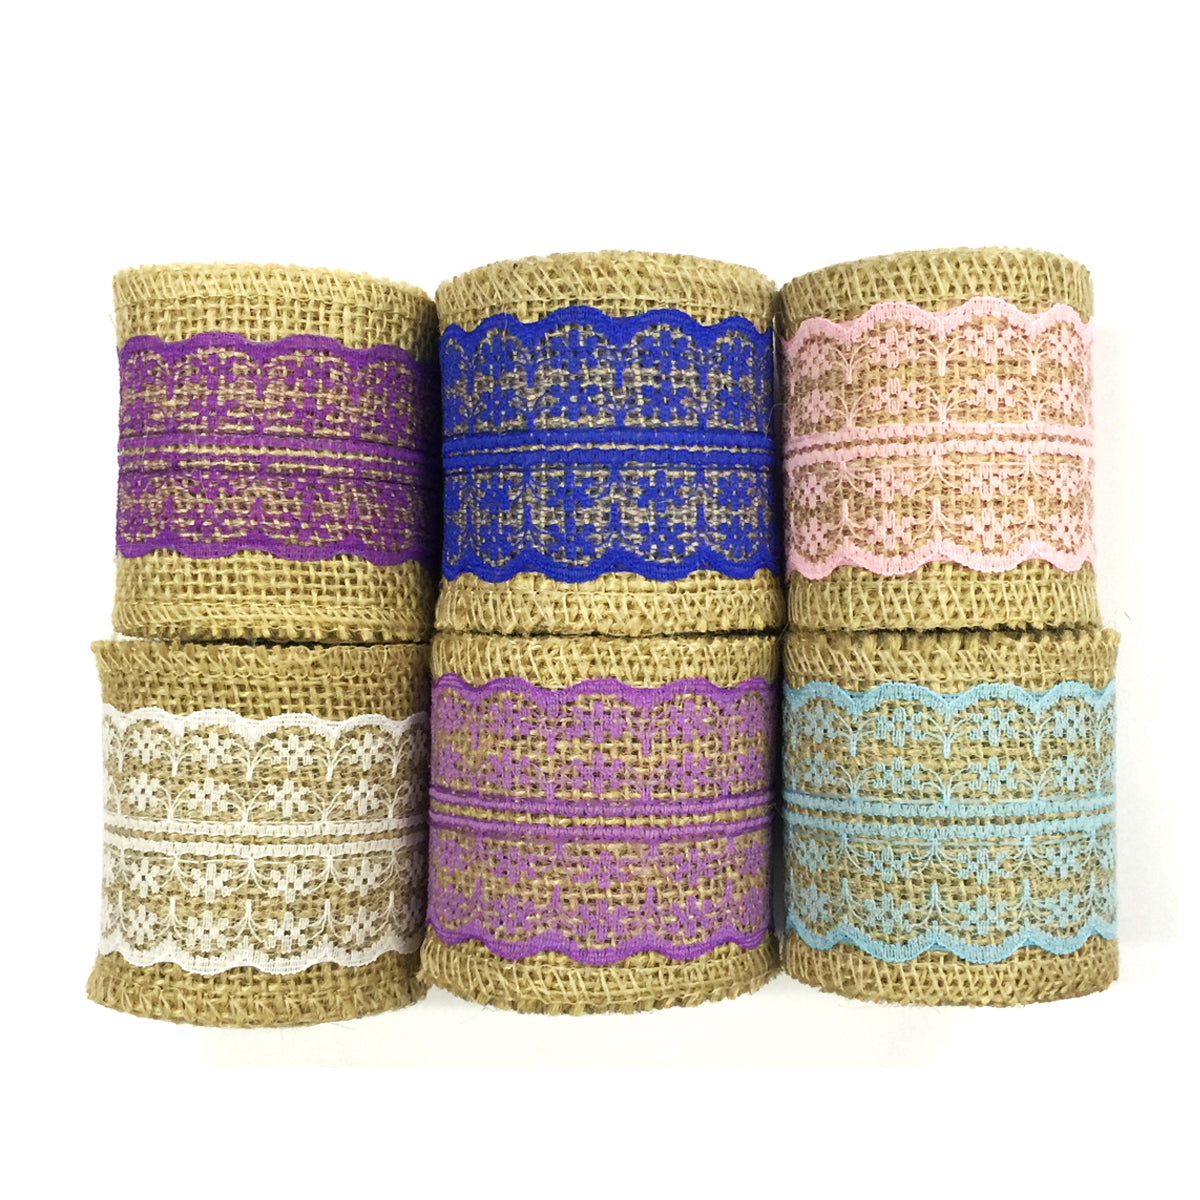 Wrapables Hessian Burlap with Lace Ribbon 2.5 Inch Width x 2 Yards Length (Set of 6)